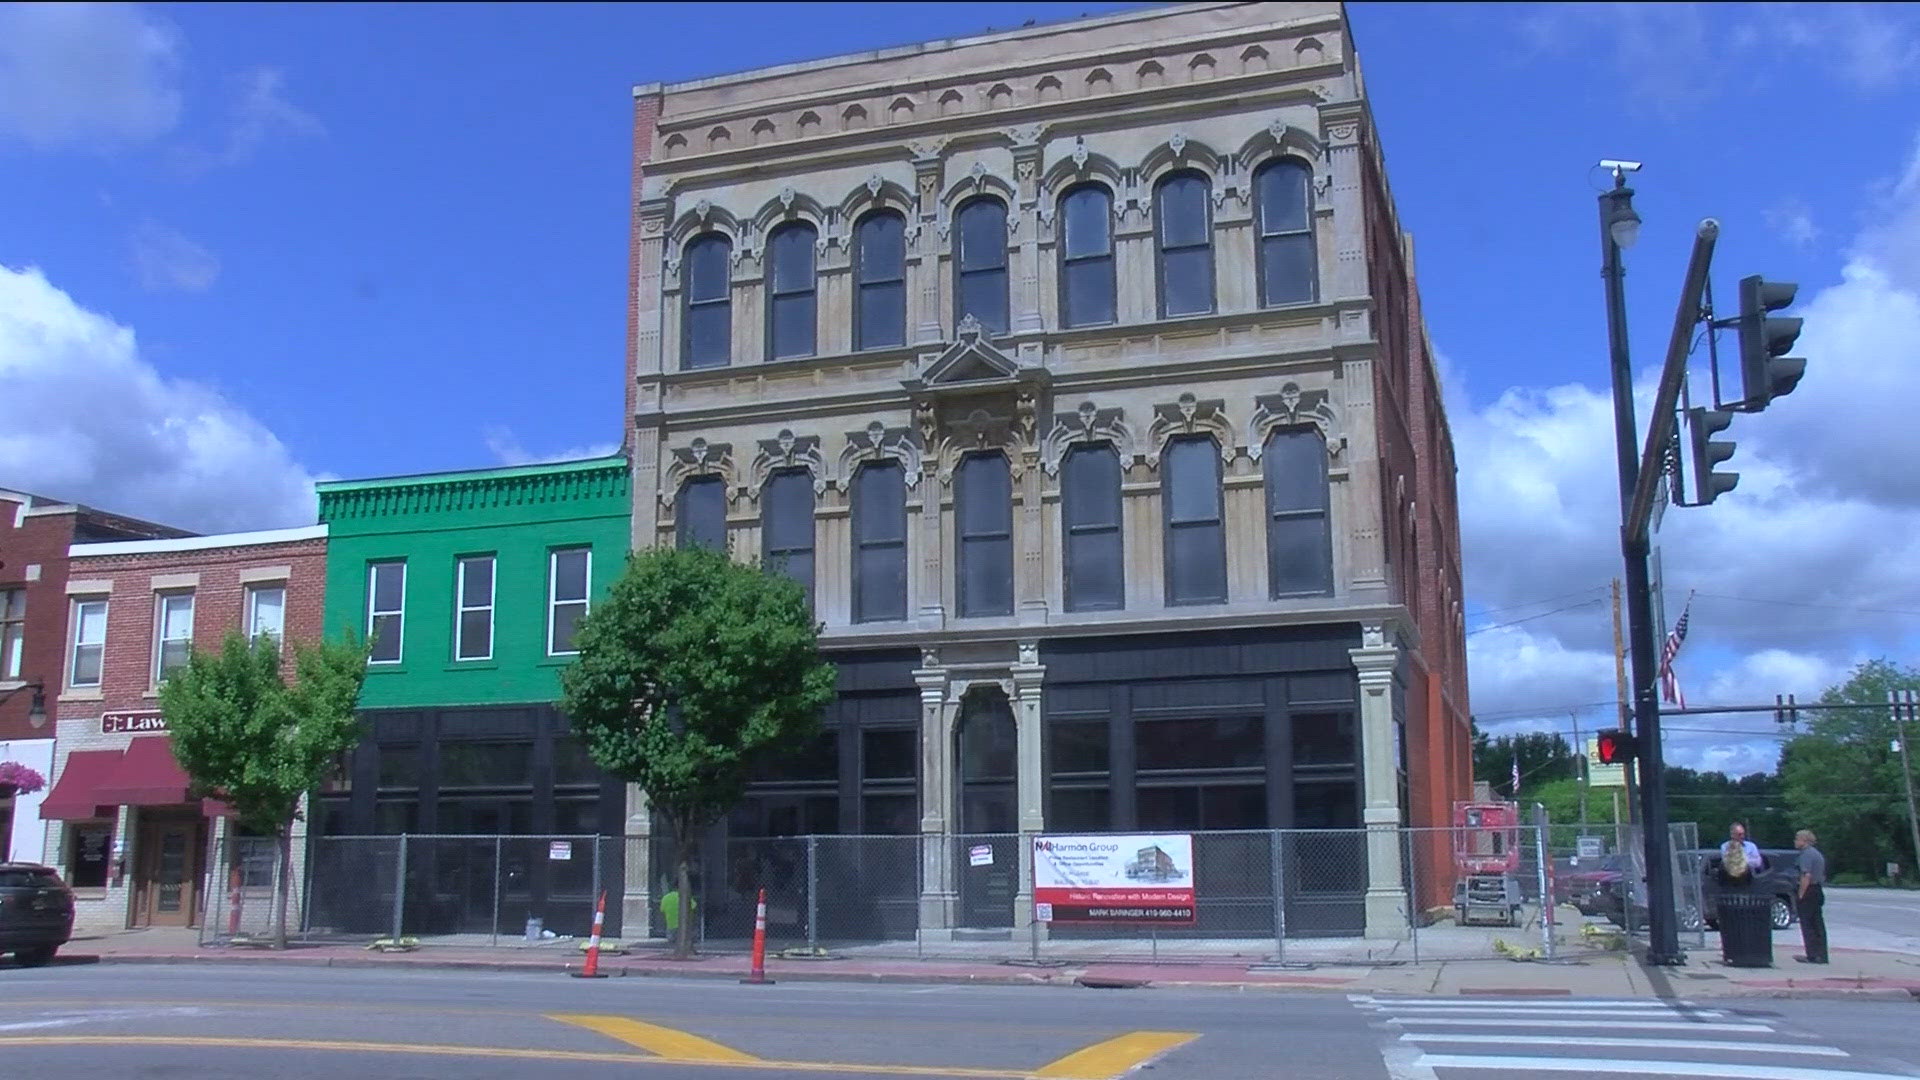 Construction is expected to be complete by 2025 on the building at the corner of Second and Clinton streets, which has sat vacant and in need of renovations.